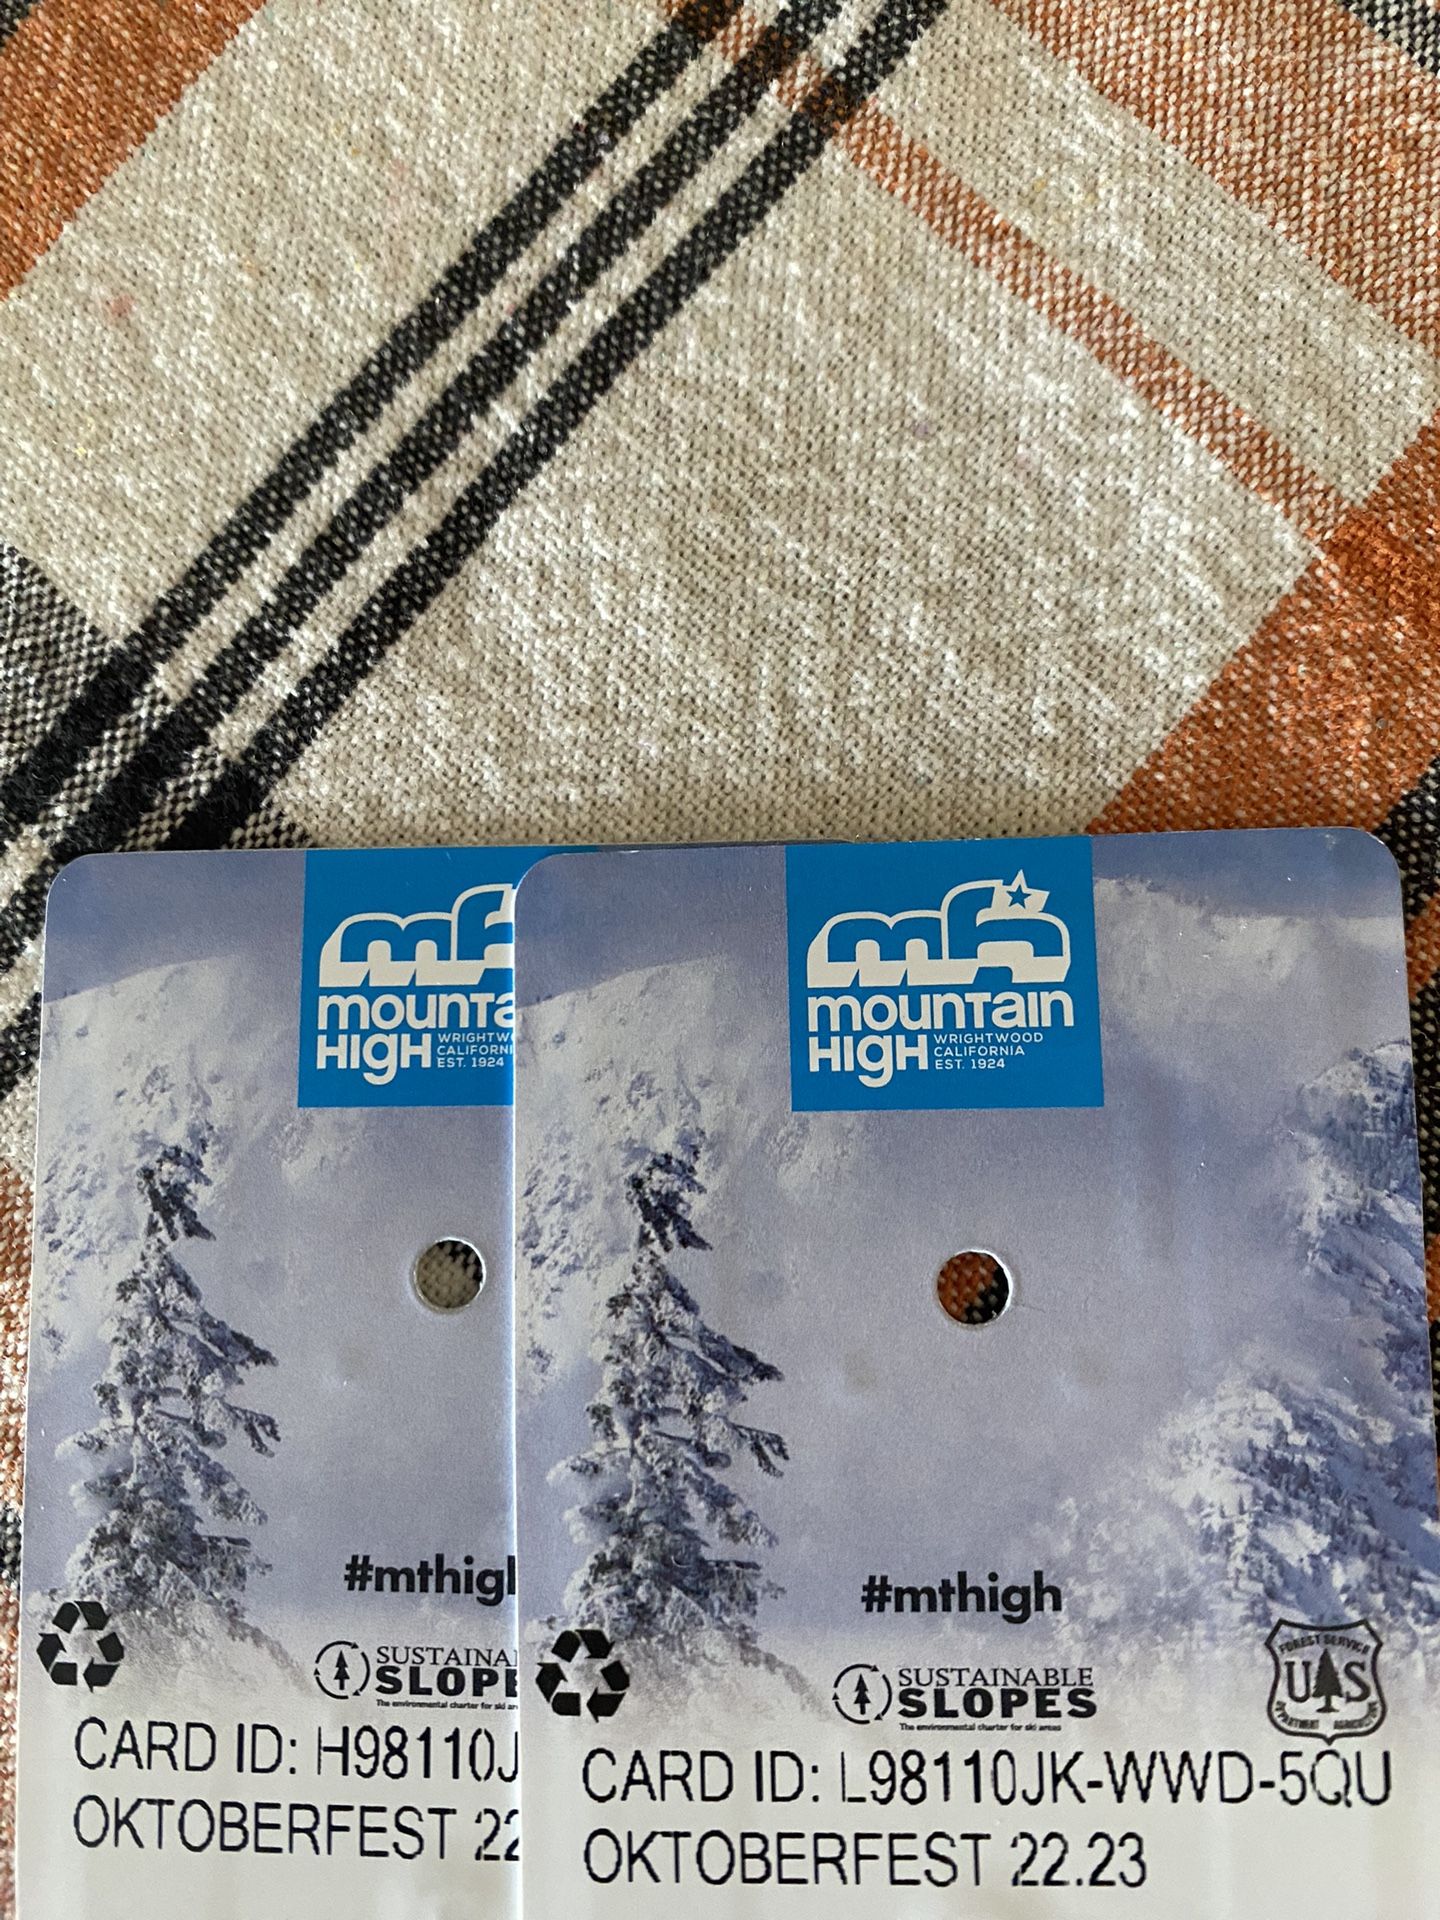 Mountain high 8hr Day Passes